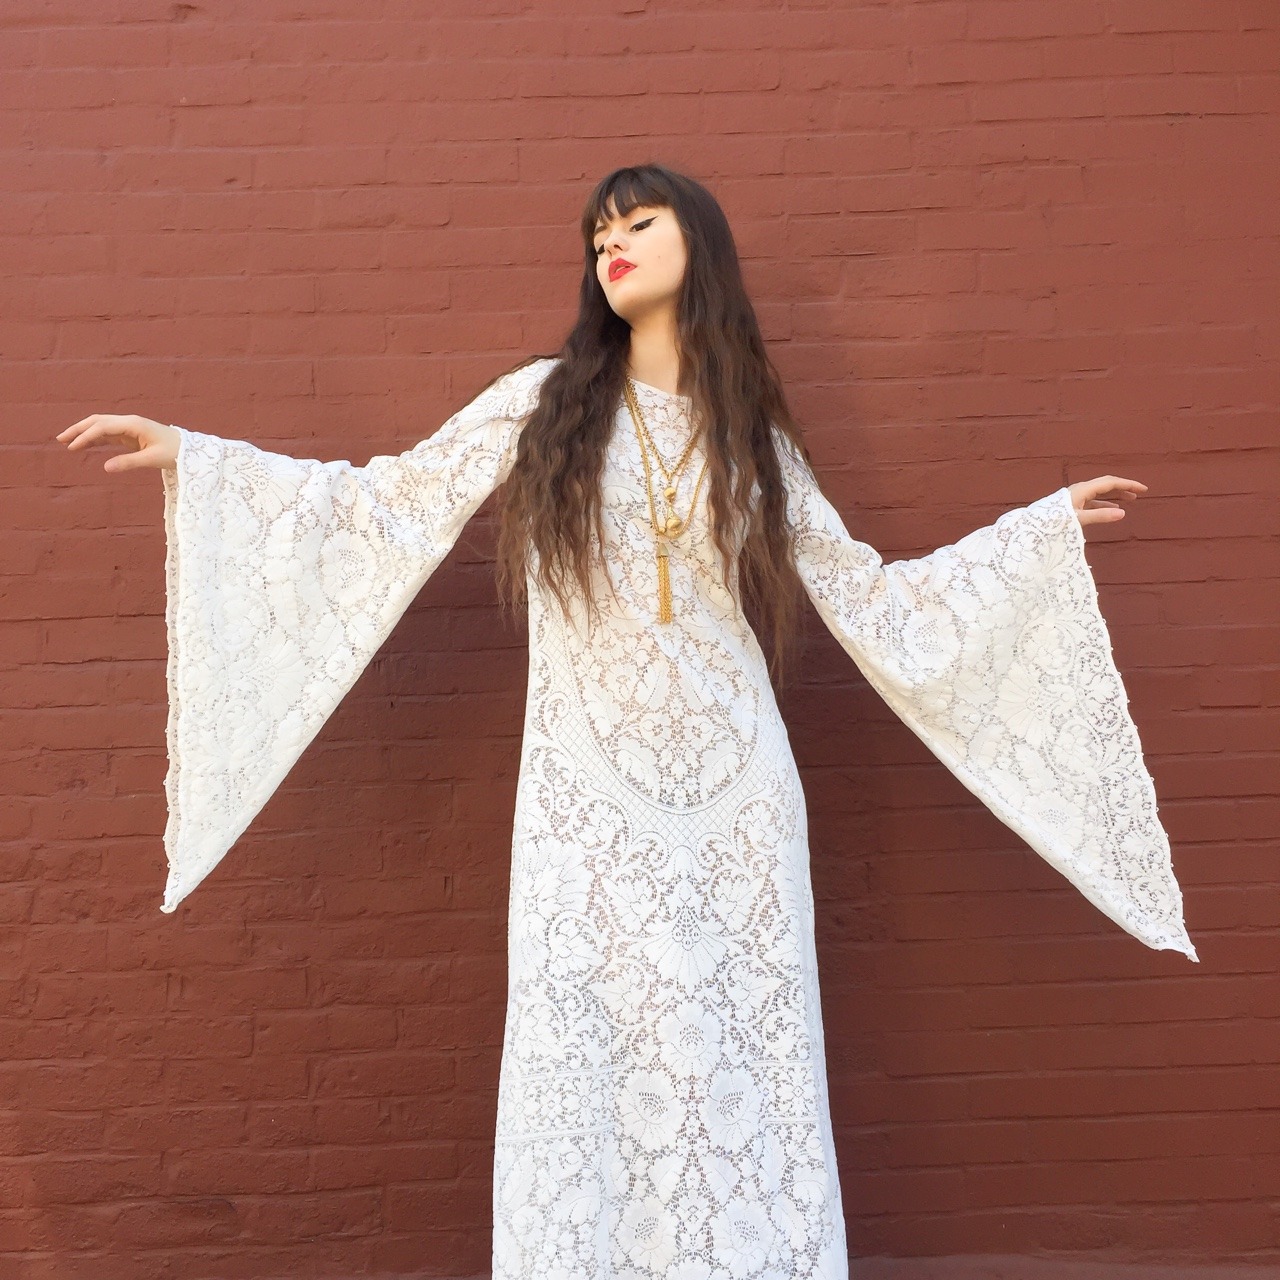 White Witch Vibes for itsacurrentaffair this May 30 + 31. Snag this gem and more exclusively at the show. See you there!